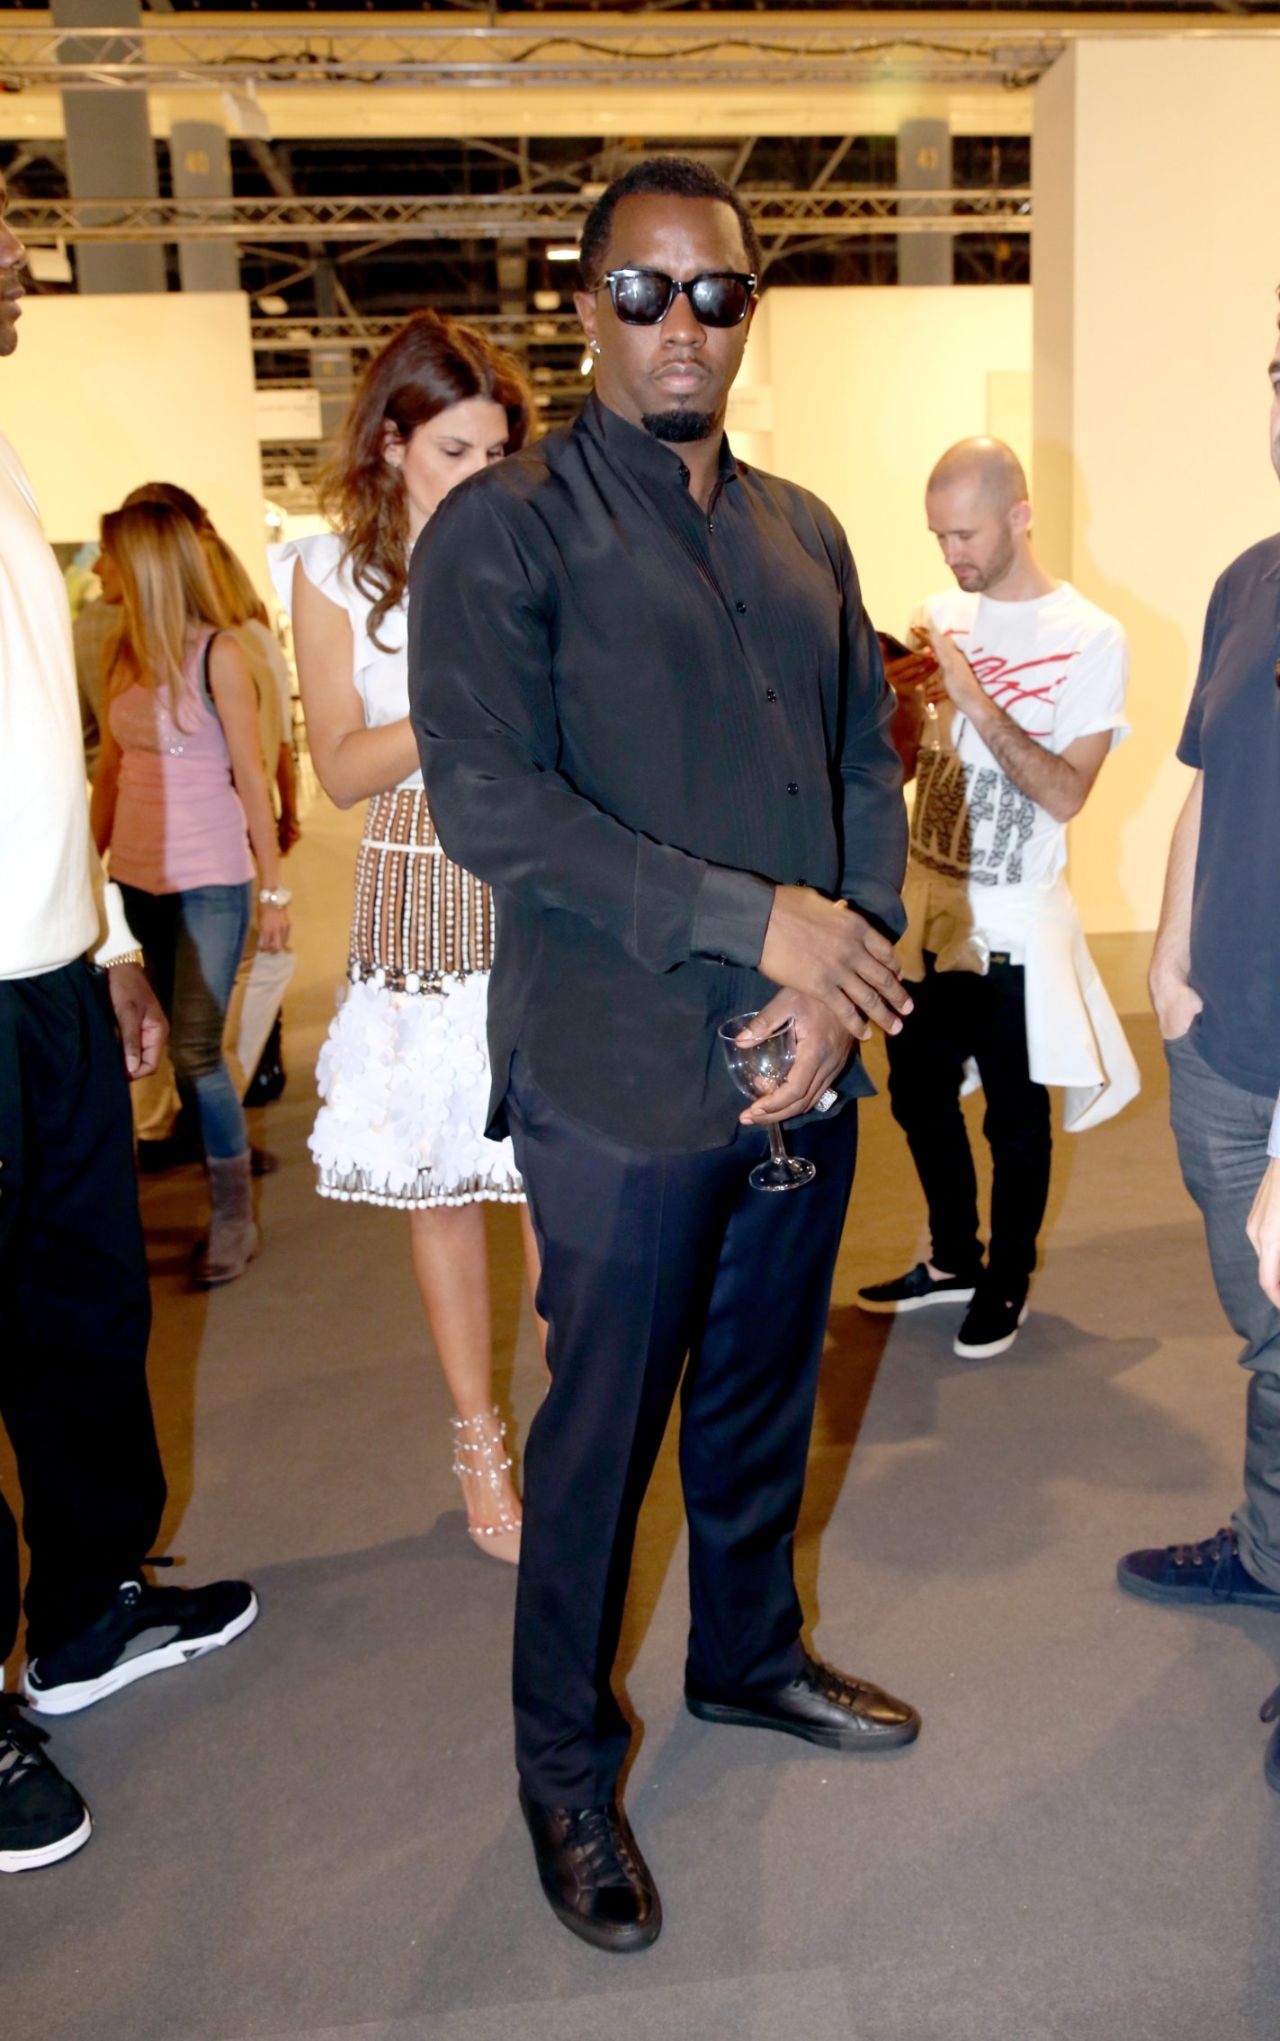 A regular in Miami, Sean P "Diddy" Combs was spotted admiring works by Jeff Koons. In 2012 he reportedly purchased a $65,000 sculpture by Ivan Navarro.